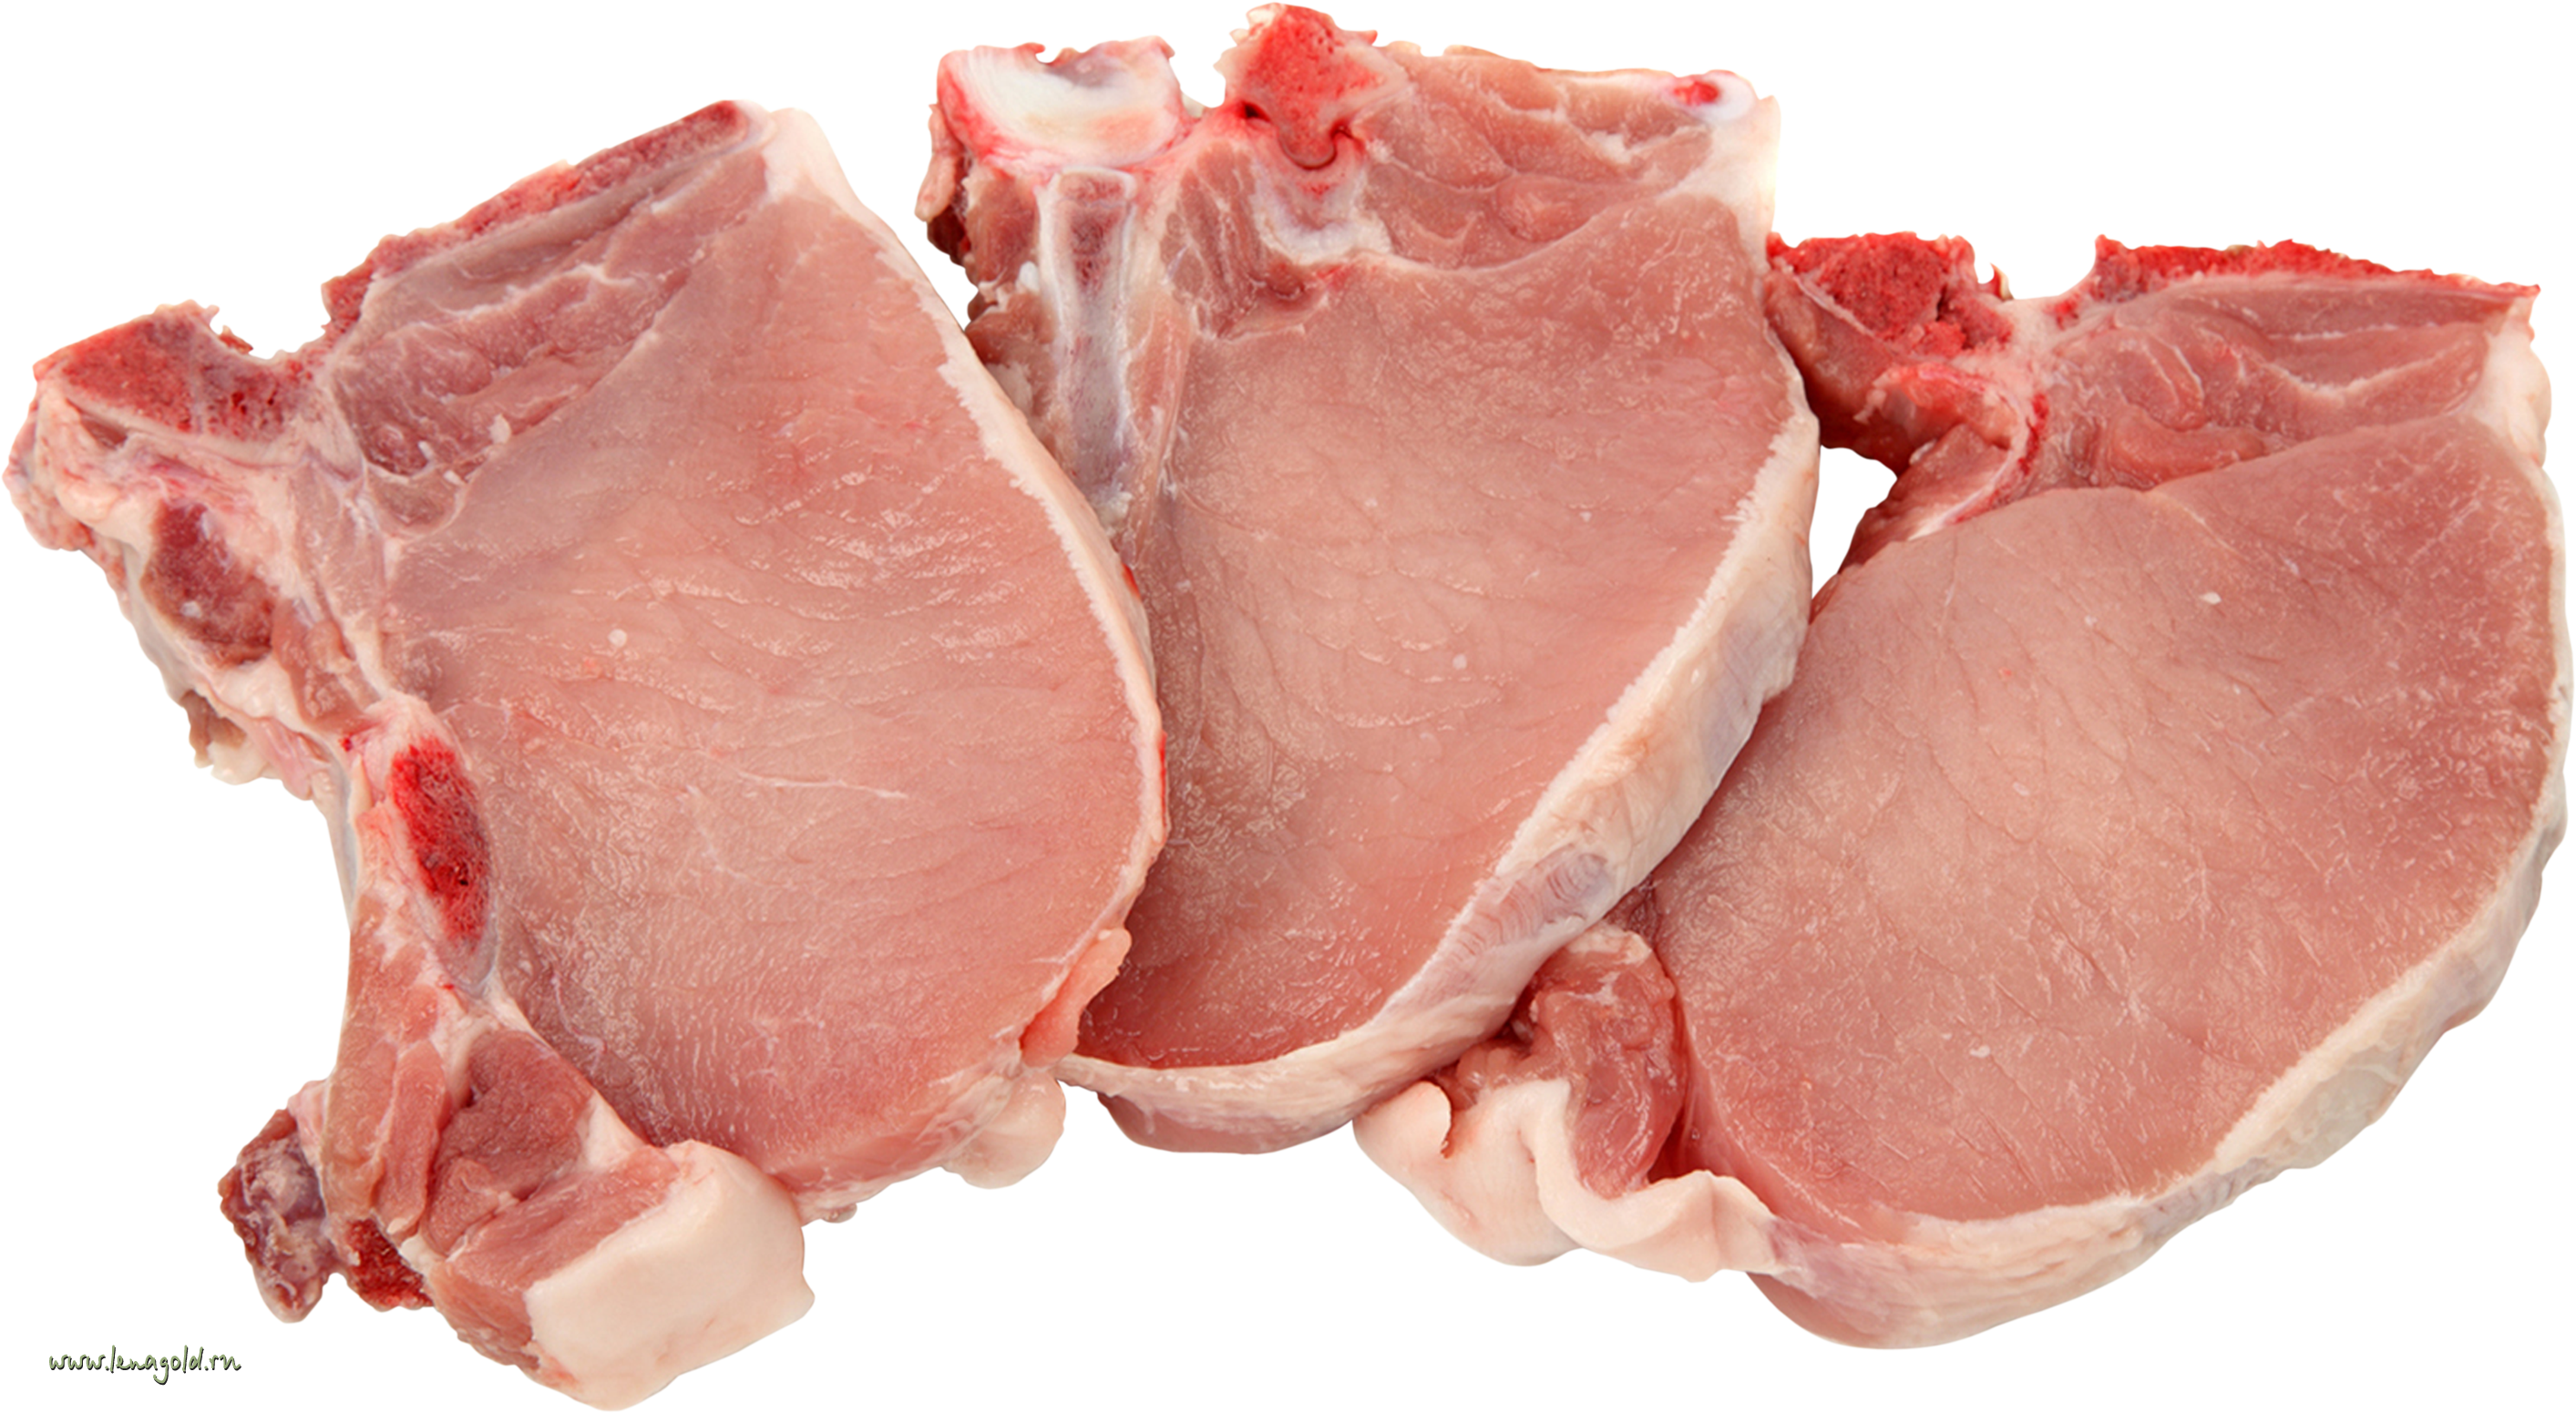 Meat PNG image